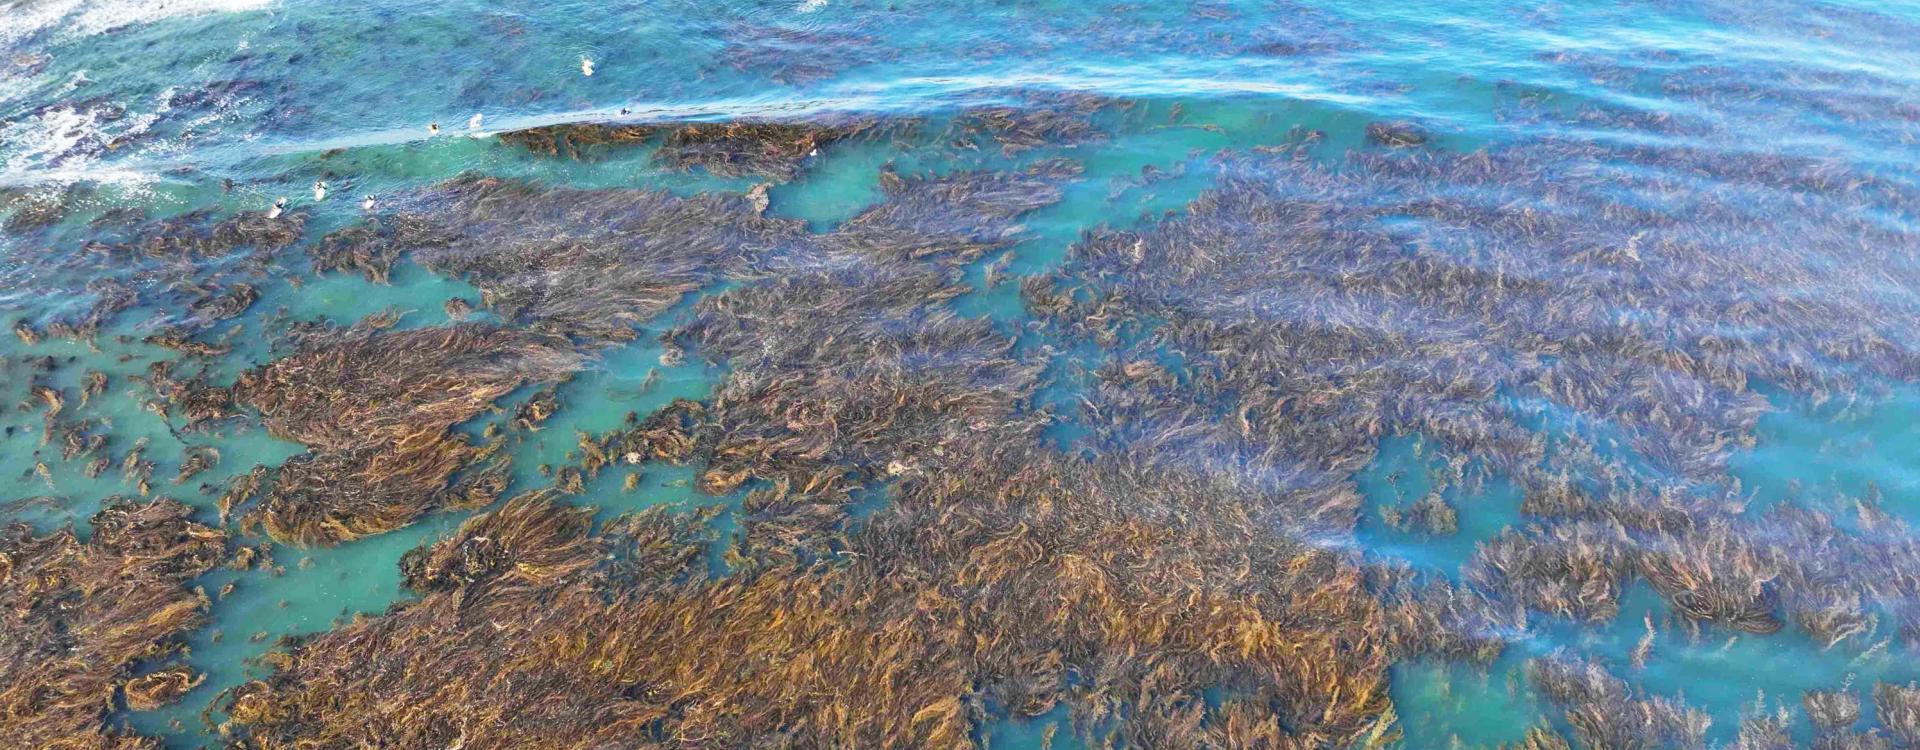 Top view of Kelp forest fronds show on shore off Santa Barbara beach